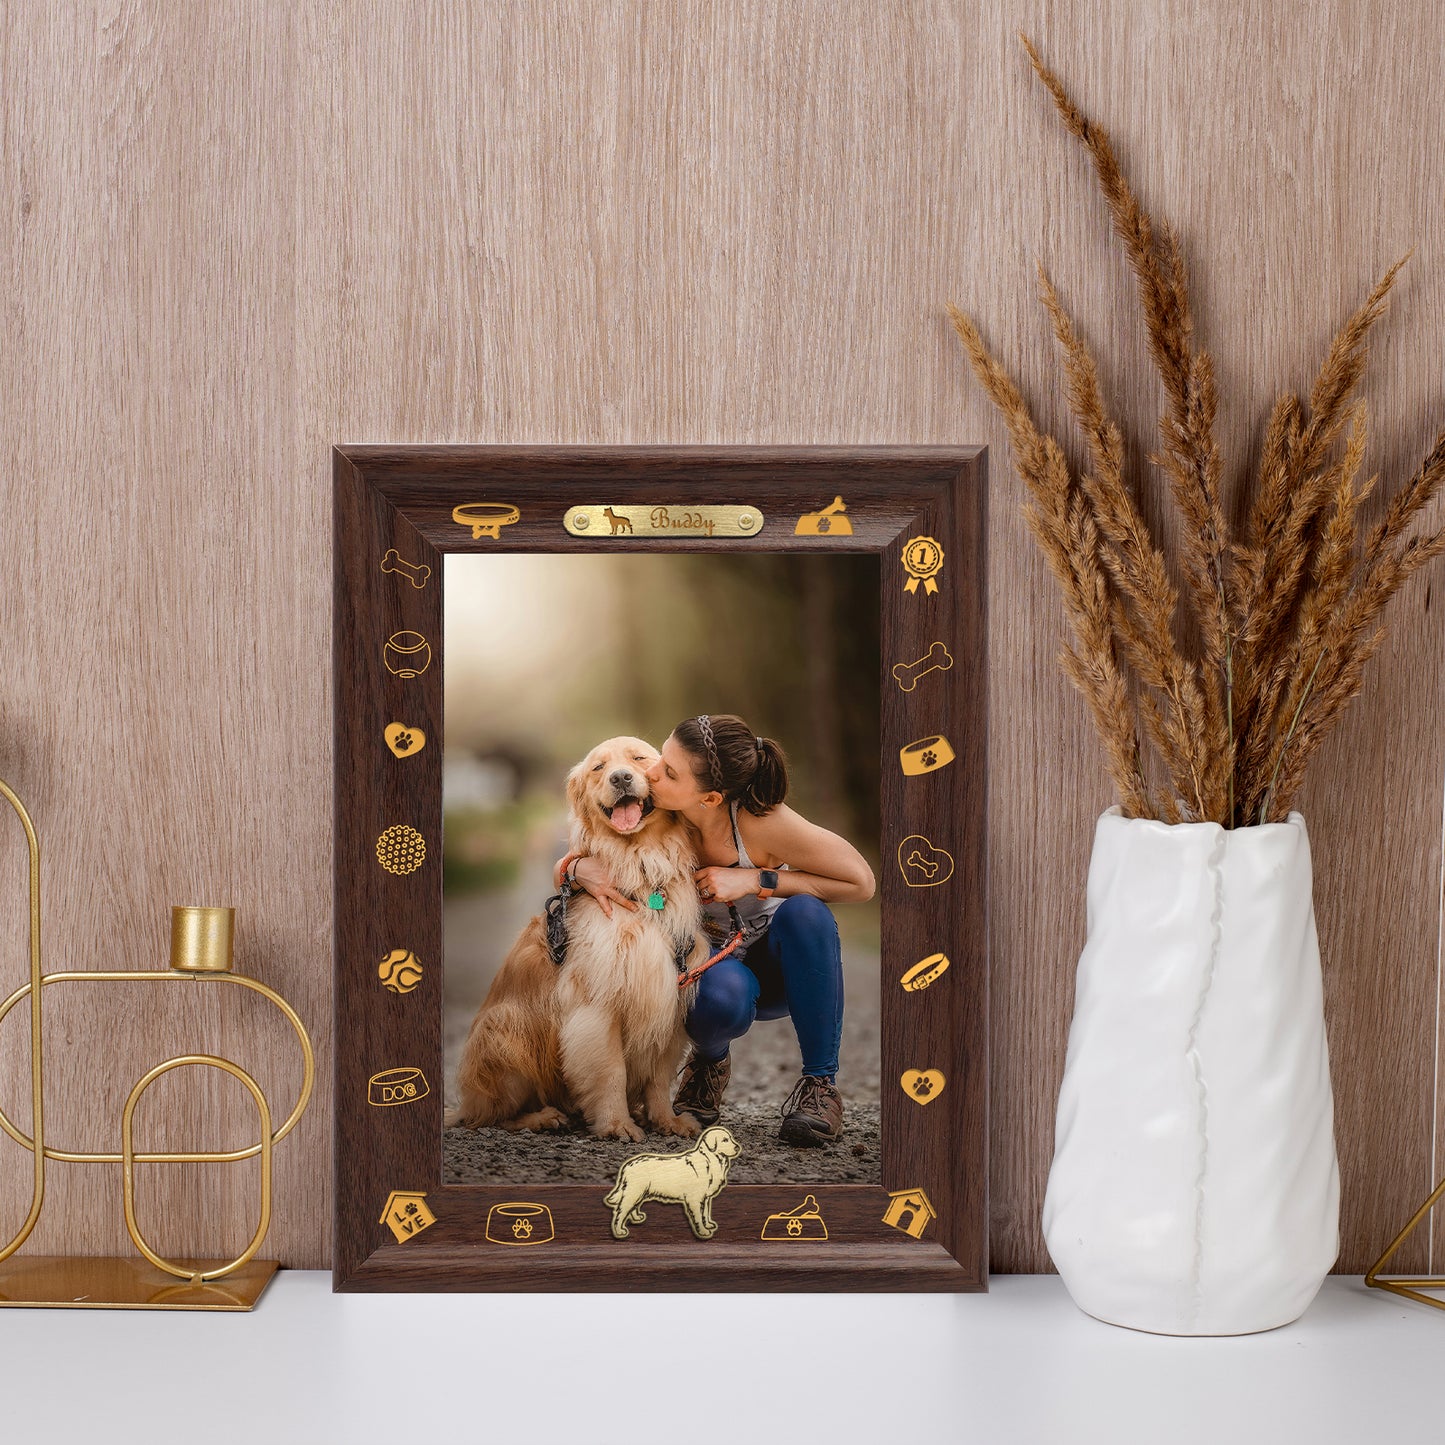 Photo Frames Decorative Dotride Custom Picture Frame, Wood Photo Frame with Custom Wooden Carving, Can be engraved with any text you want, suitable for Suitable for Various Themes, Golden Retriever